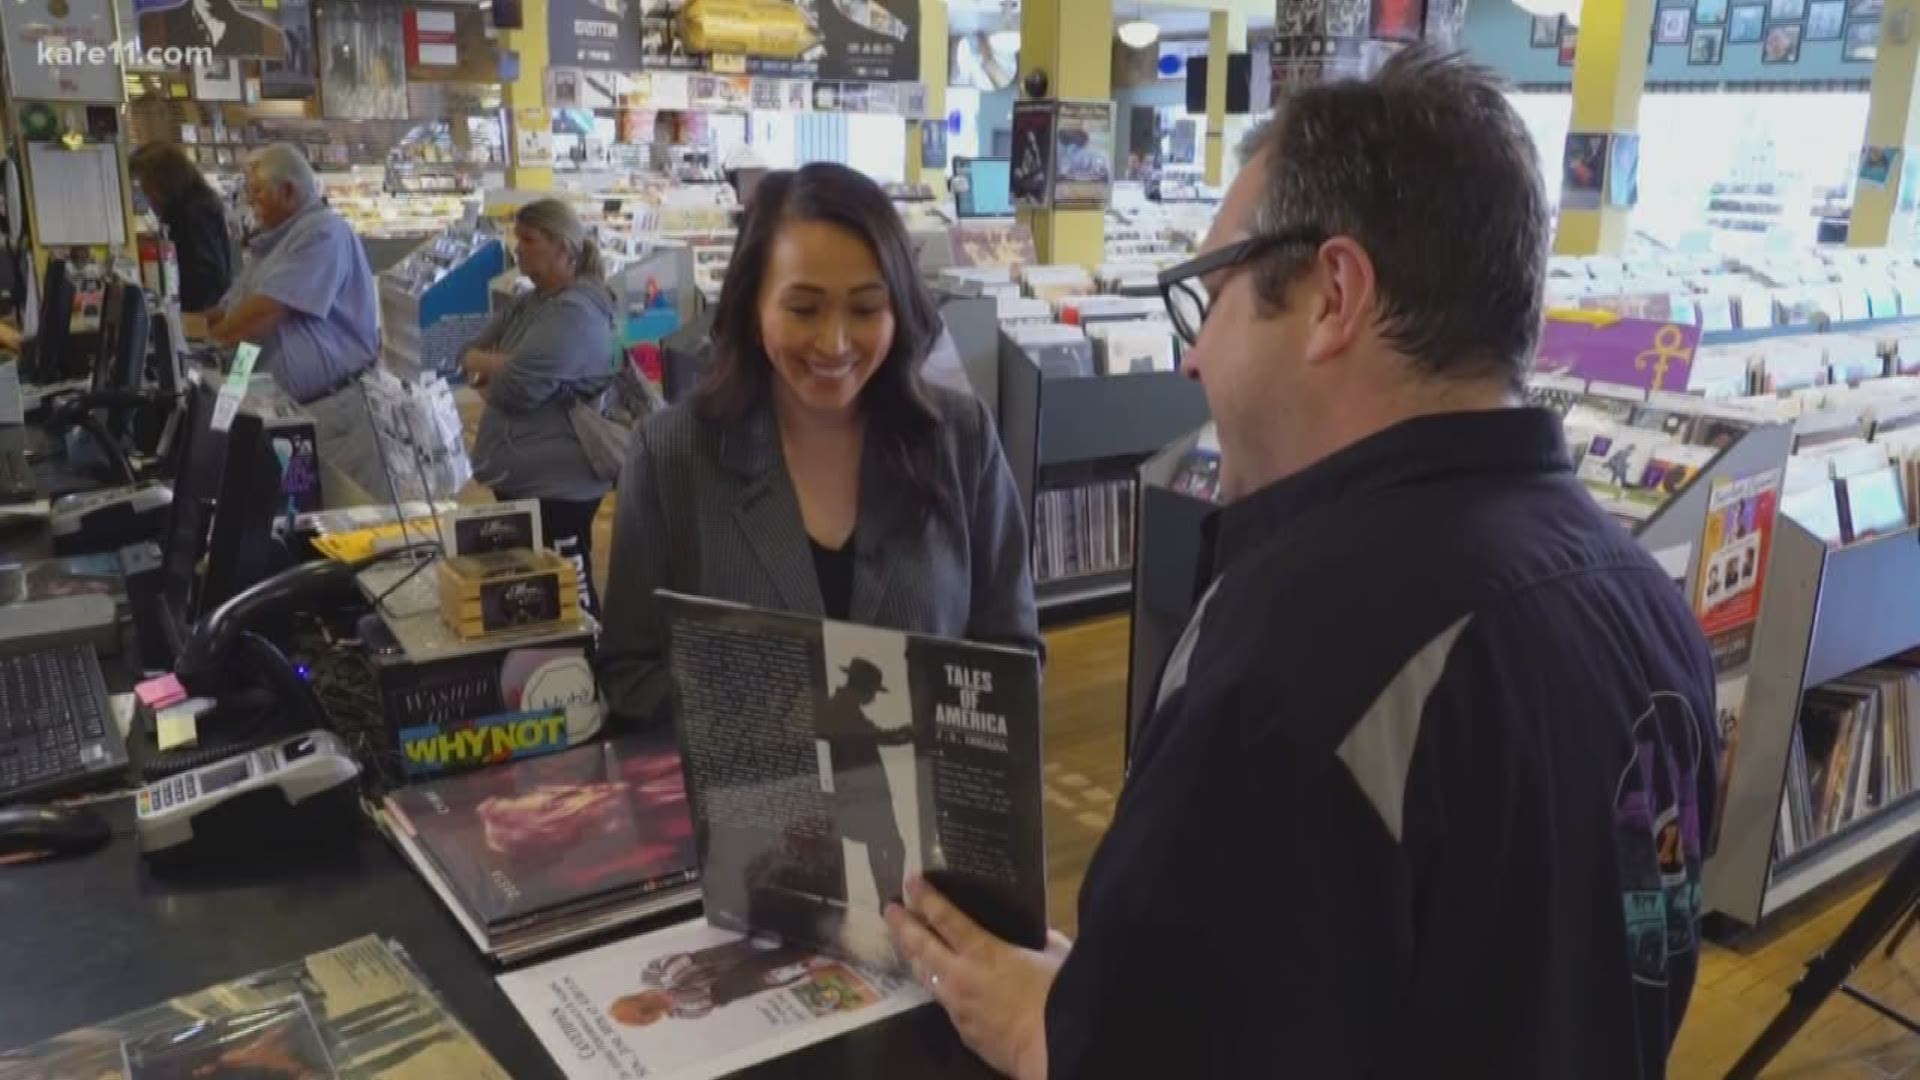 We're learning more each day about new KARE 11  Sunrise anchor Gia Vang. One thing is that she's a music fanatic, and likes hers served up on vinyl.